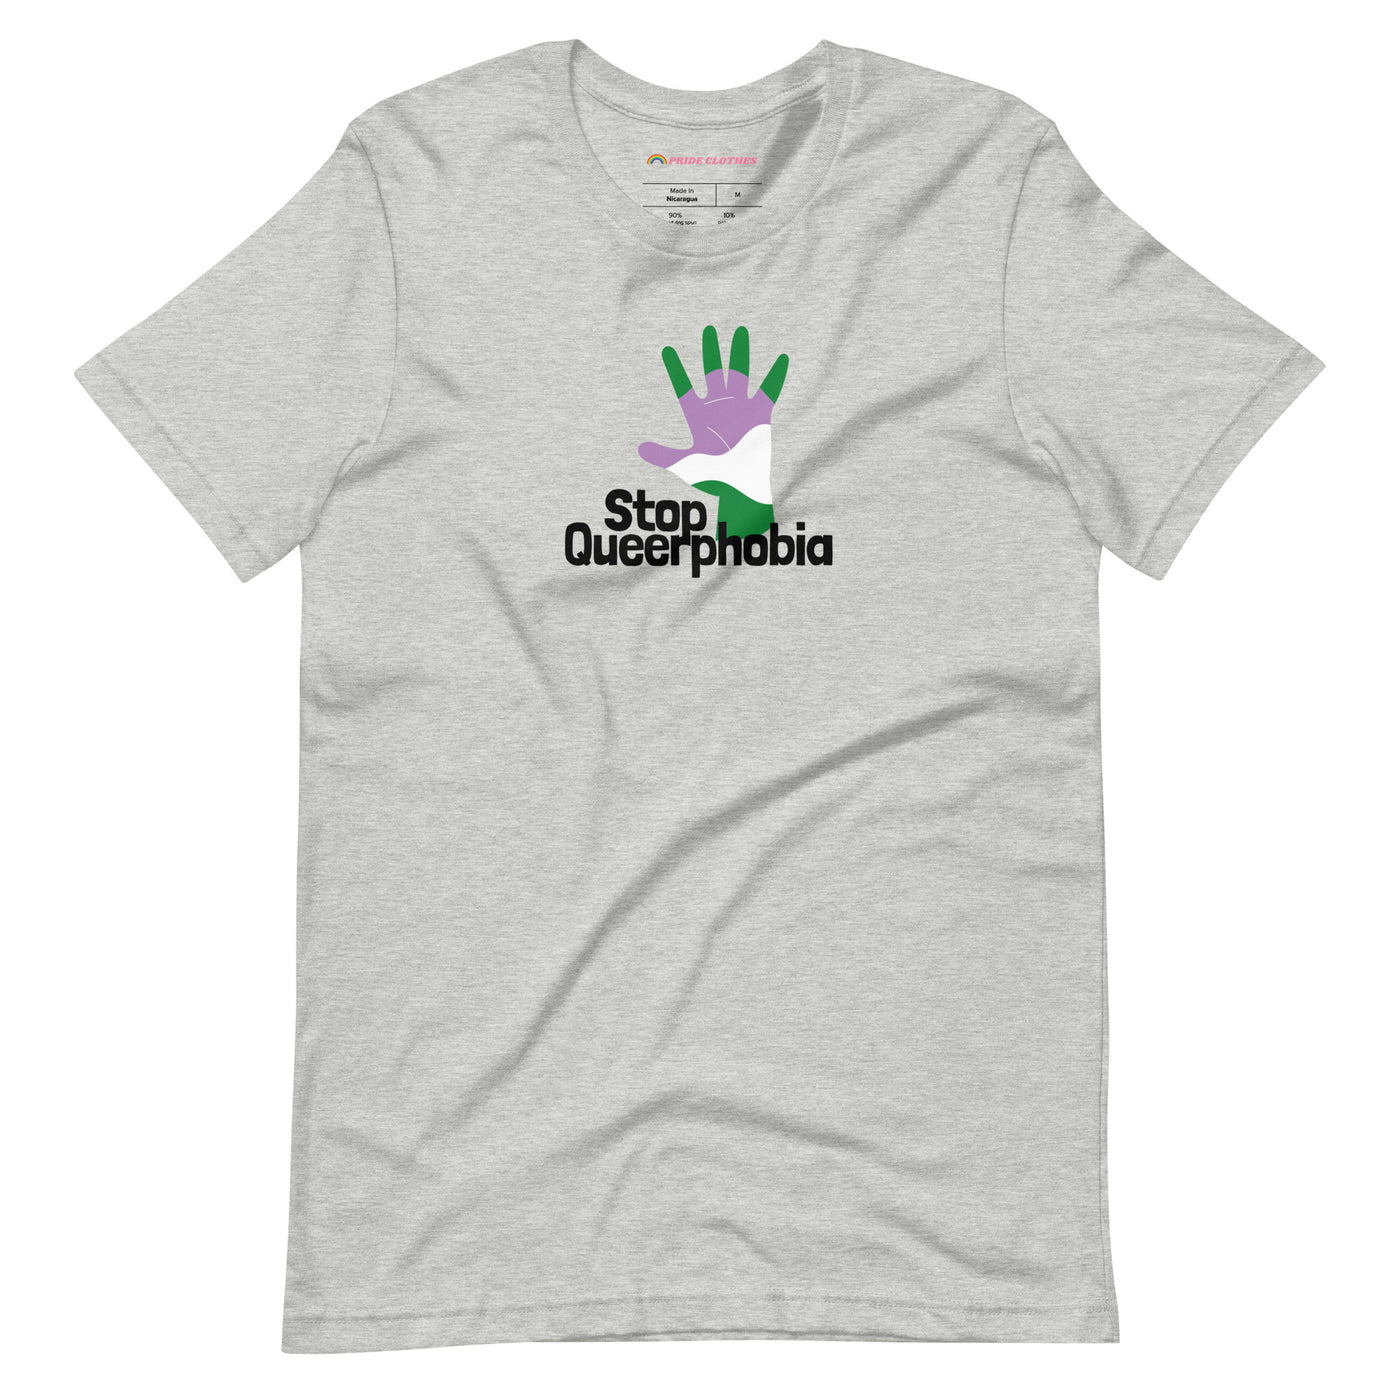 Pride Clothes - Stop Hate Stop Discrimination Stop Queerphobia T-Shirt - Athletic Heather